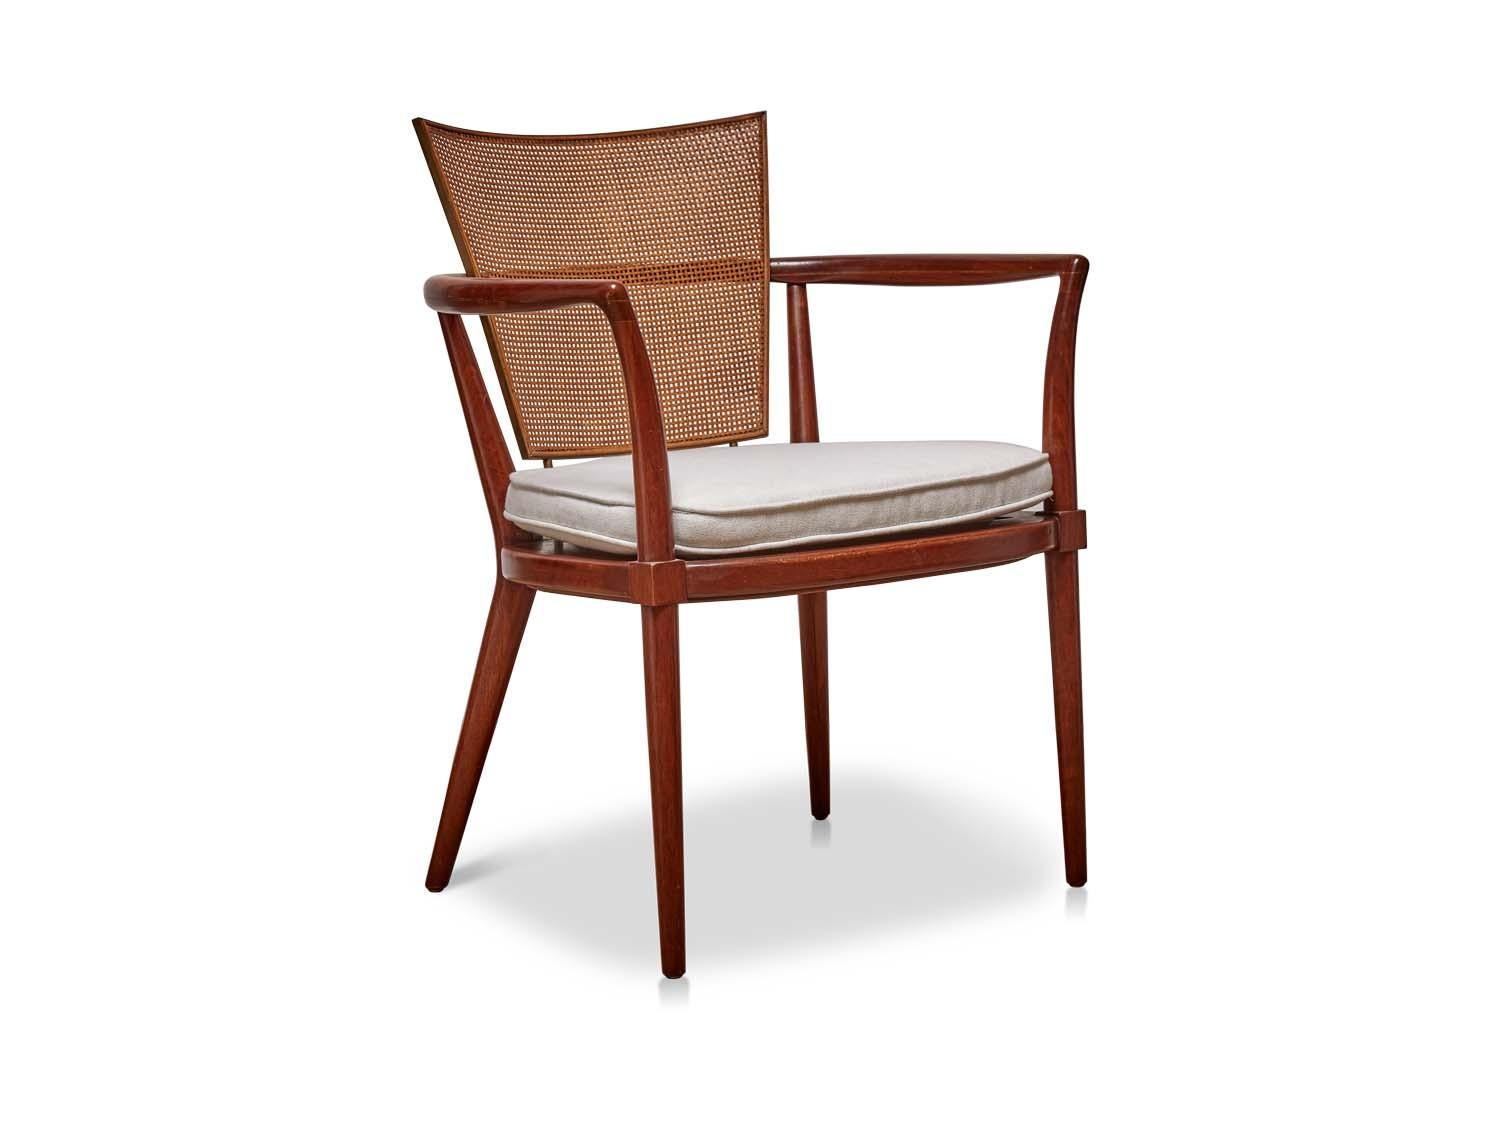 Pair of vintage cane back chairs by Bert England
Dimensions: 33 W x 18 D x 31 H x 15 SH
Sculptural lounge chairs by CA designer Bert England for Johnson Furniture. Walnut frames, caned backs and brass details, circa 1955.